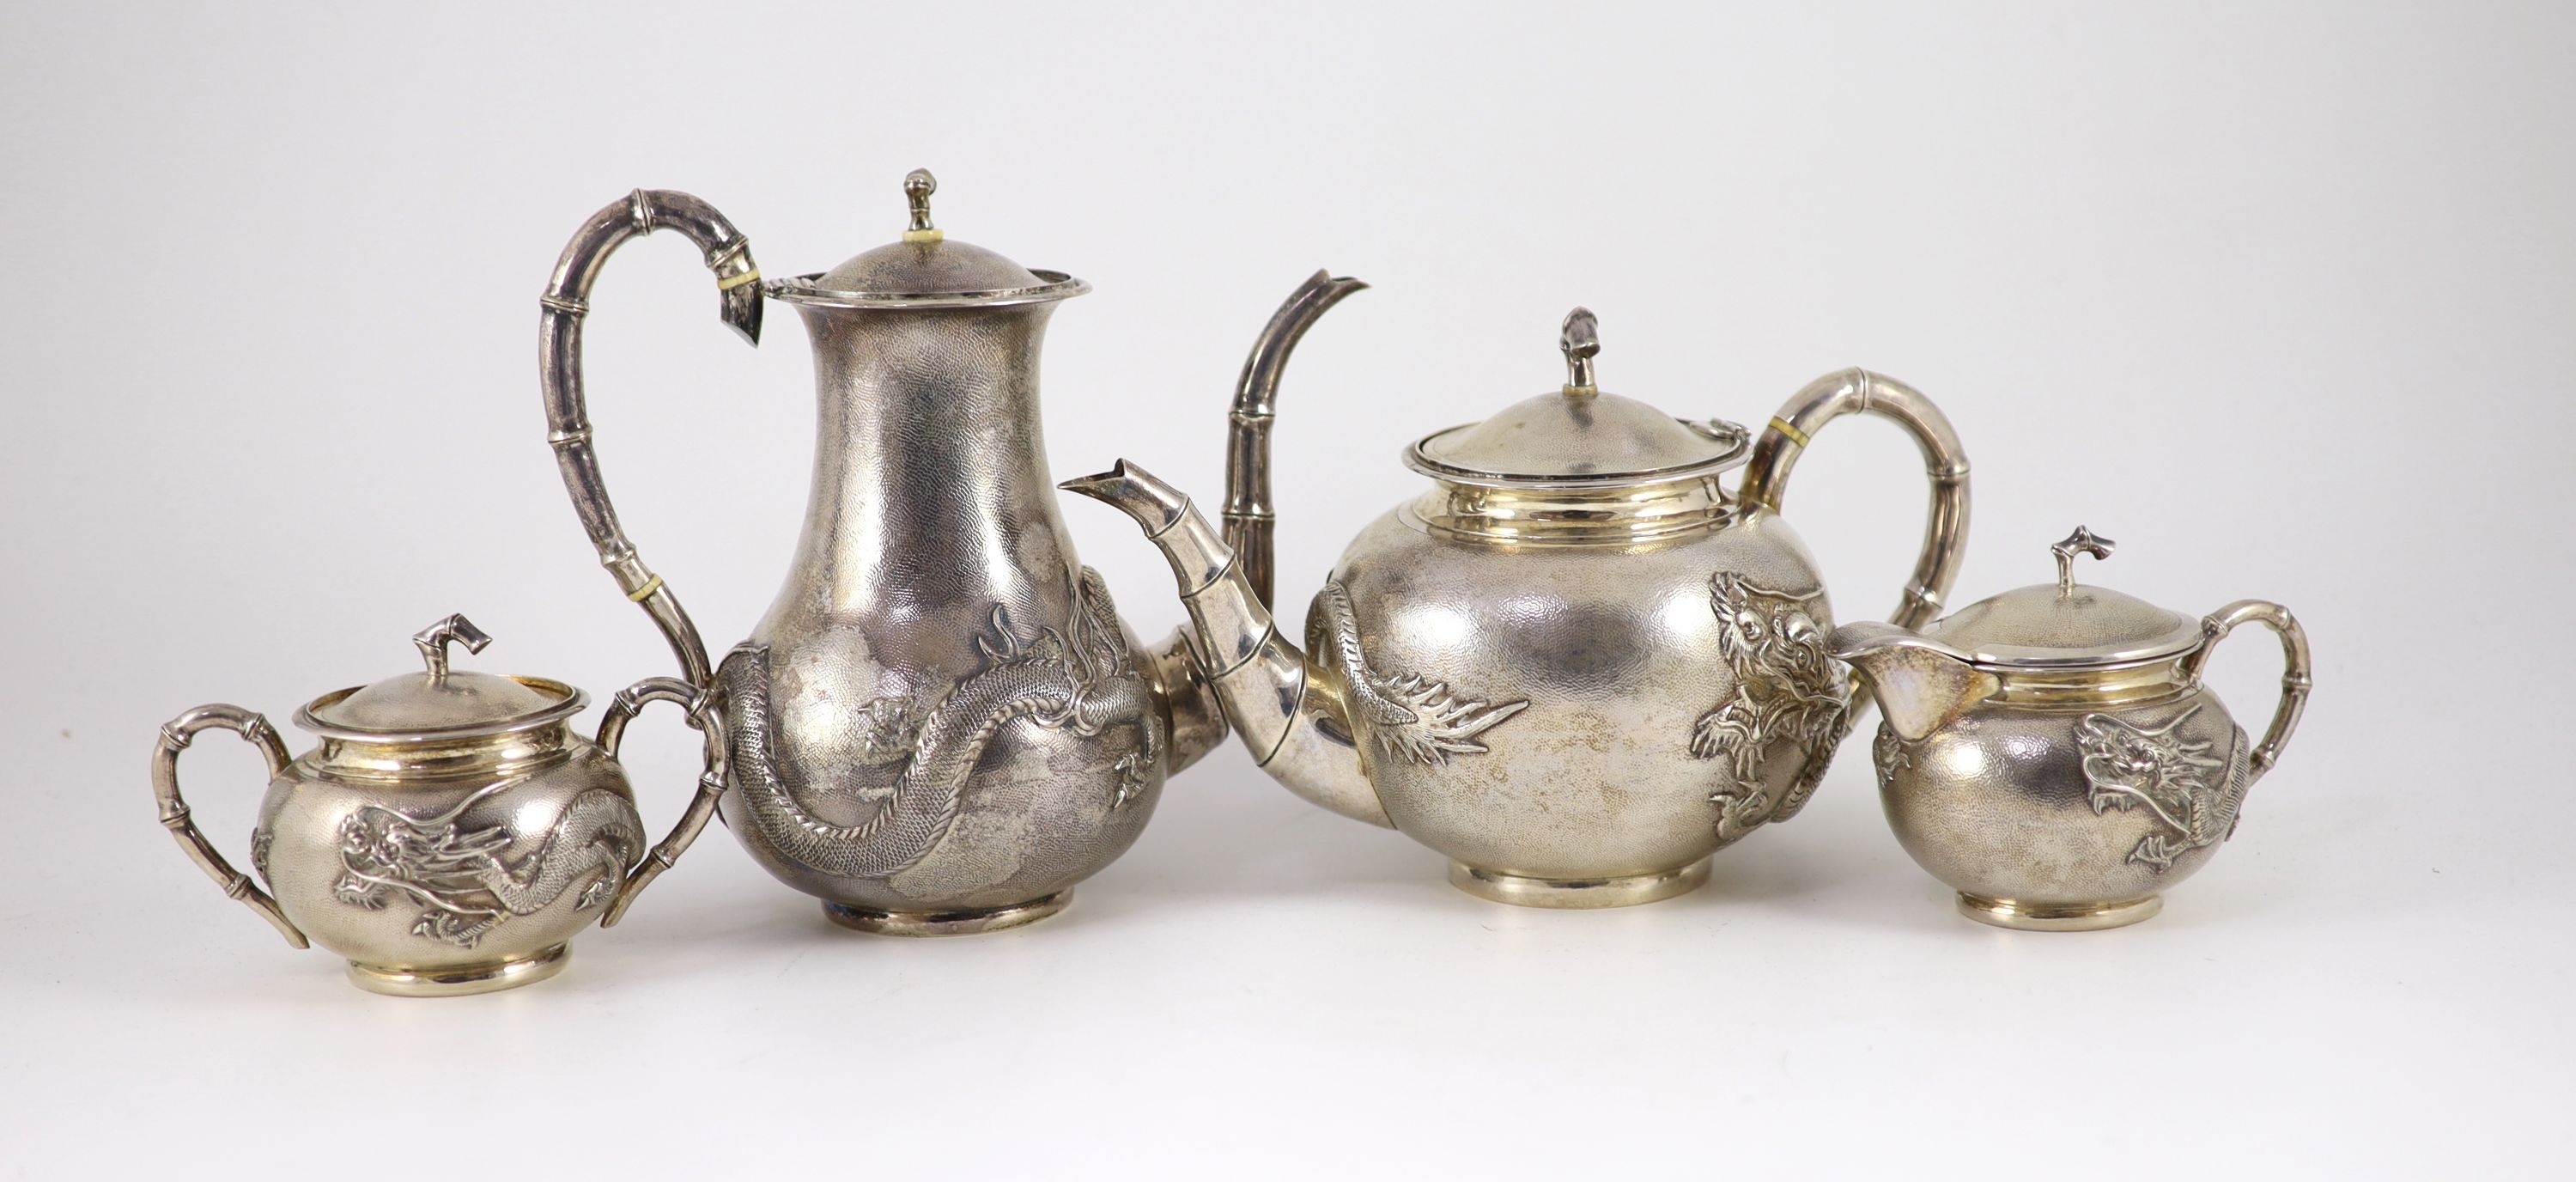 A matched early 20th century Chinese four piece planished silver tea and coffee set, cream and sugar by Wang Hing, teapot by Tack Hing and coffee pot apparently unmarked